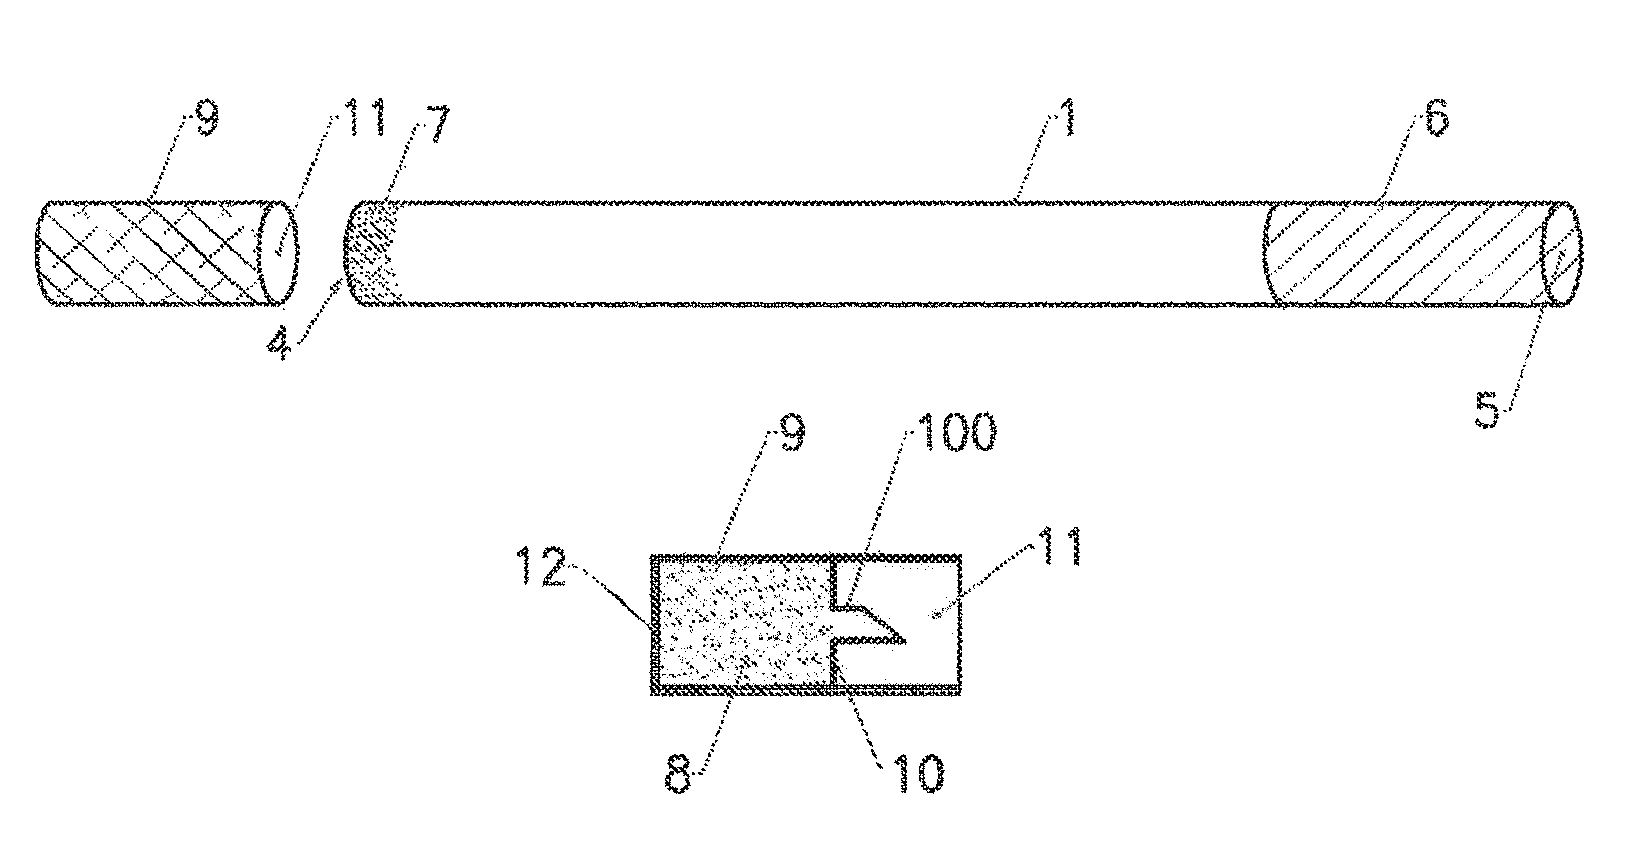 Self-lighting device for a cigarette